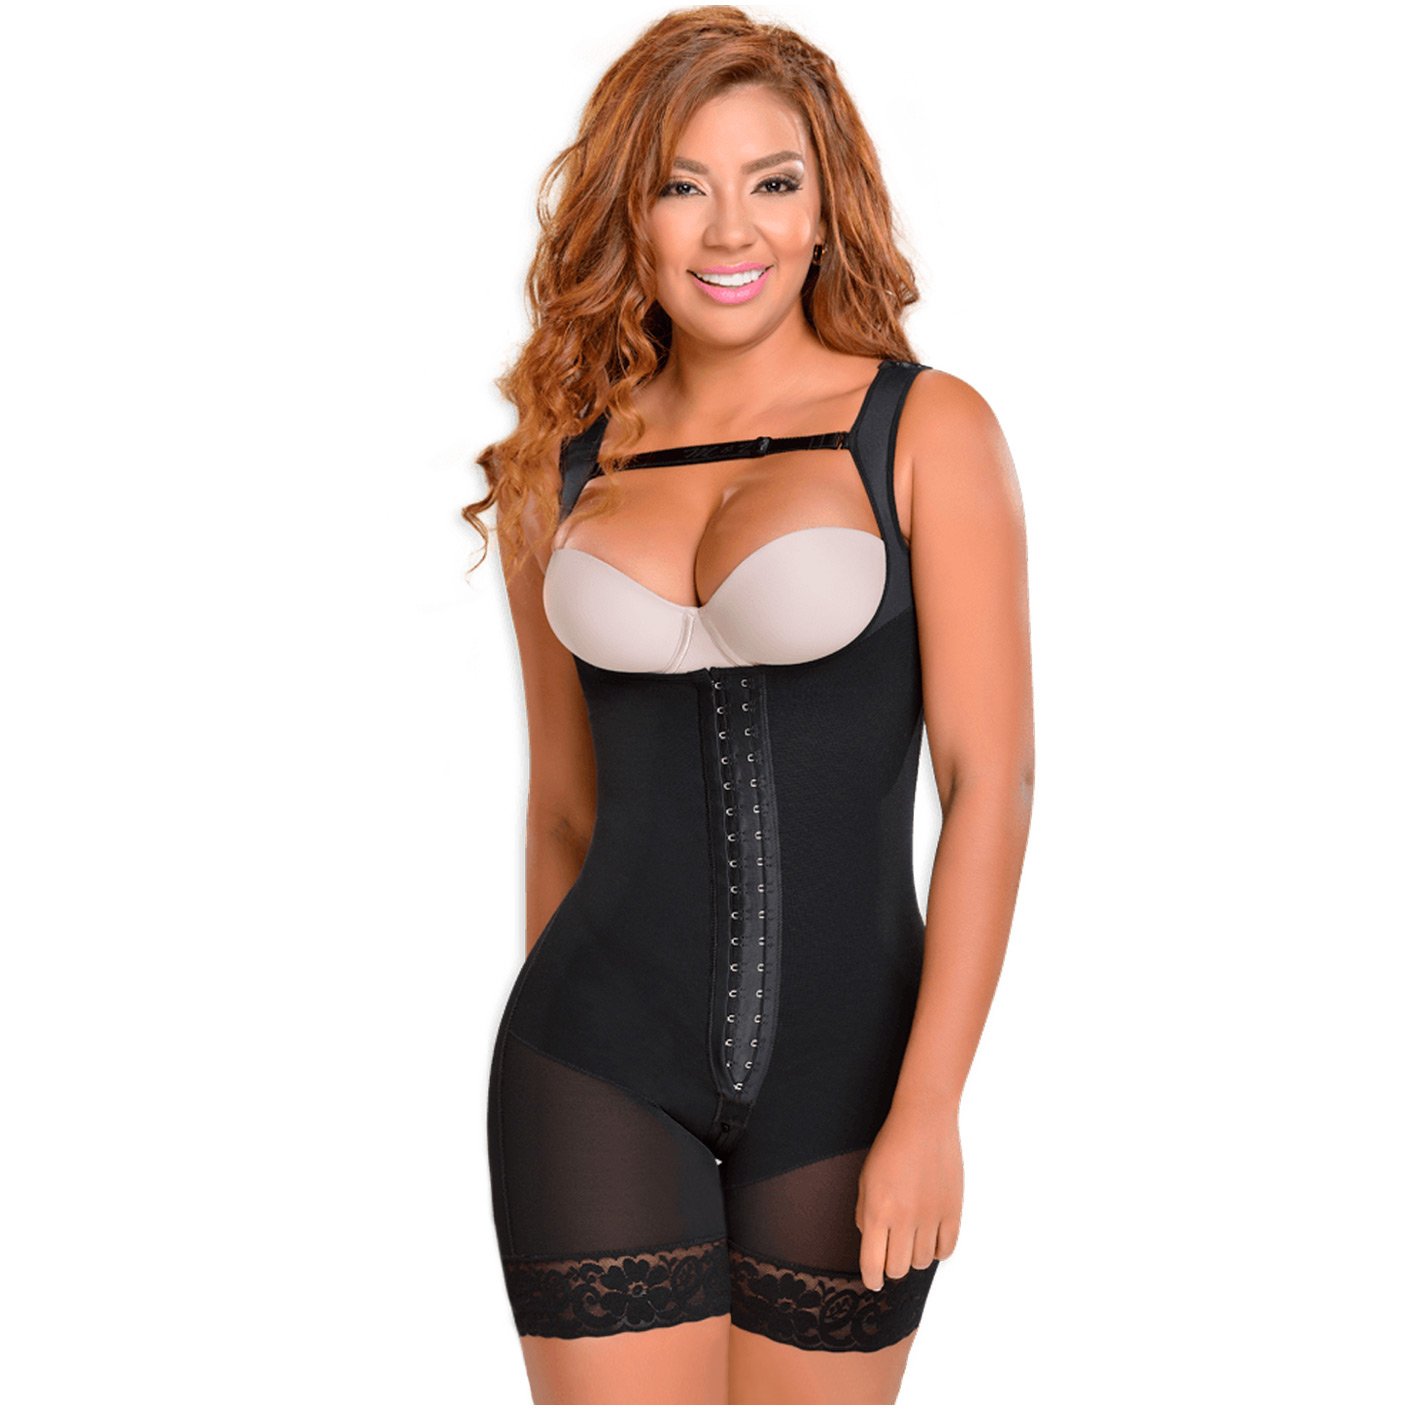 Style 46 Mid Thigh Girdle 6in Waist Slit Crotch by Contour